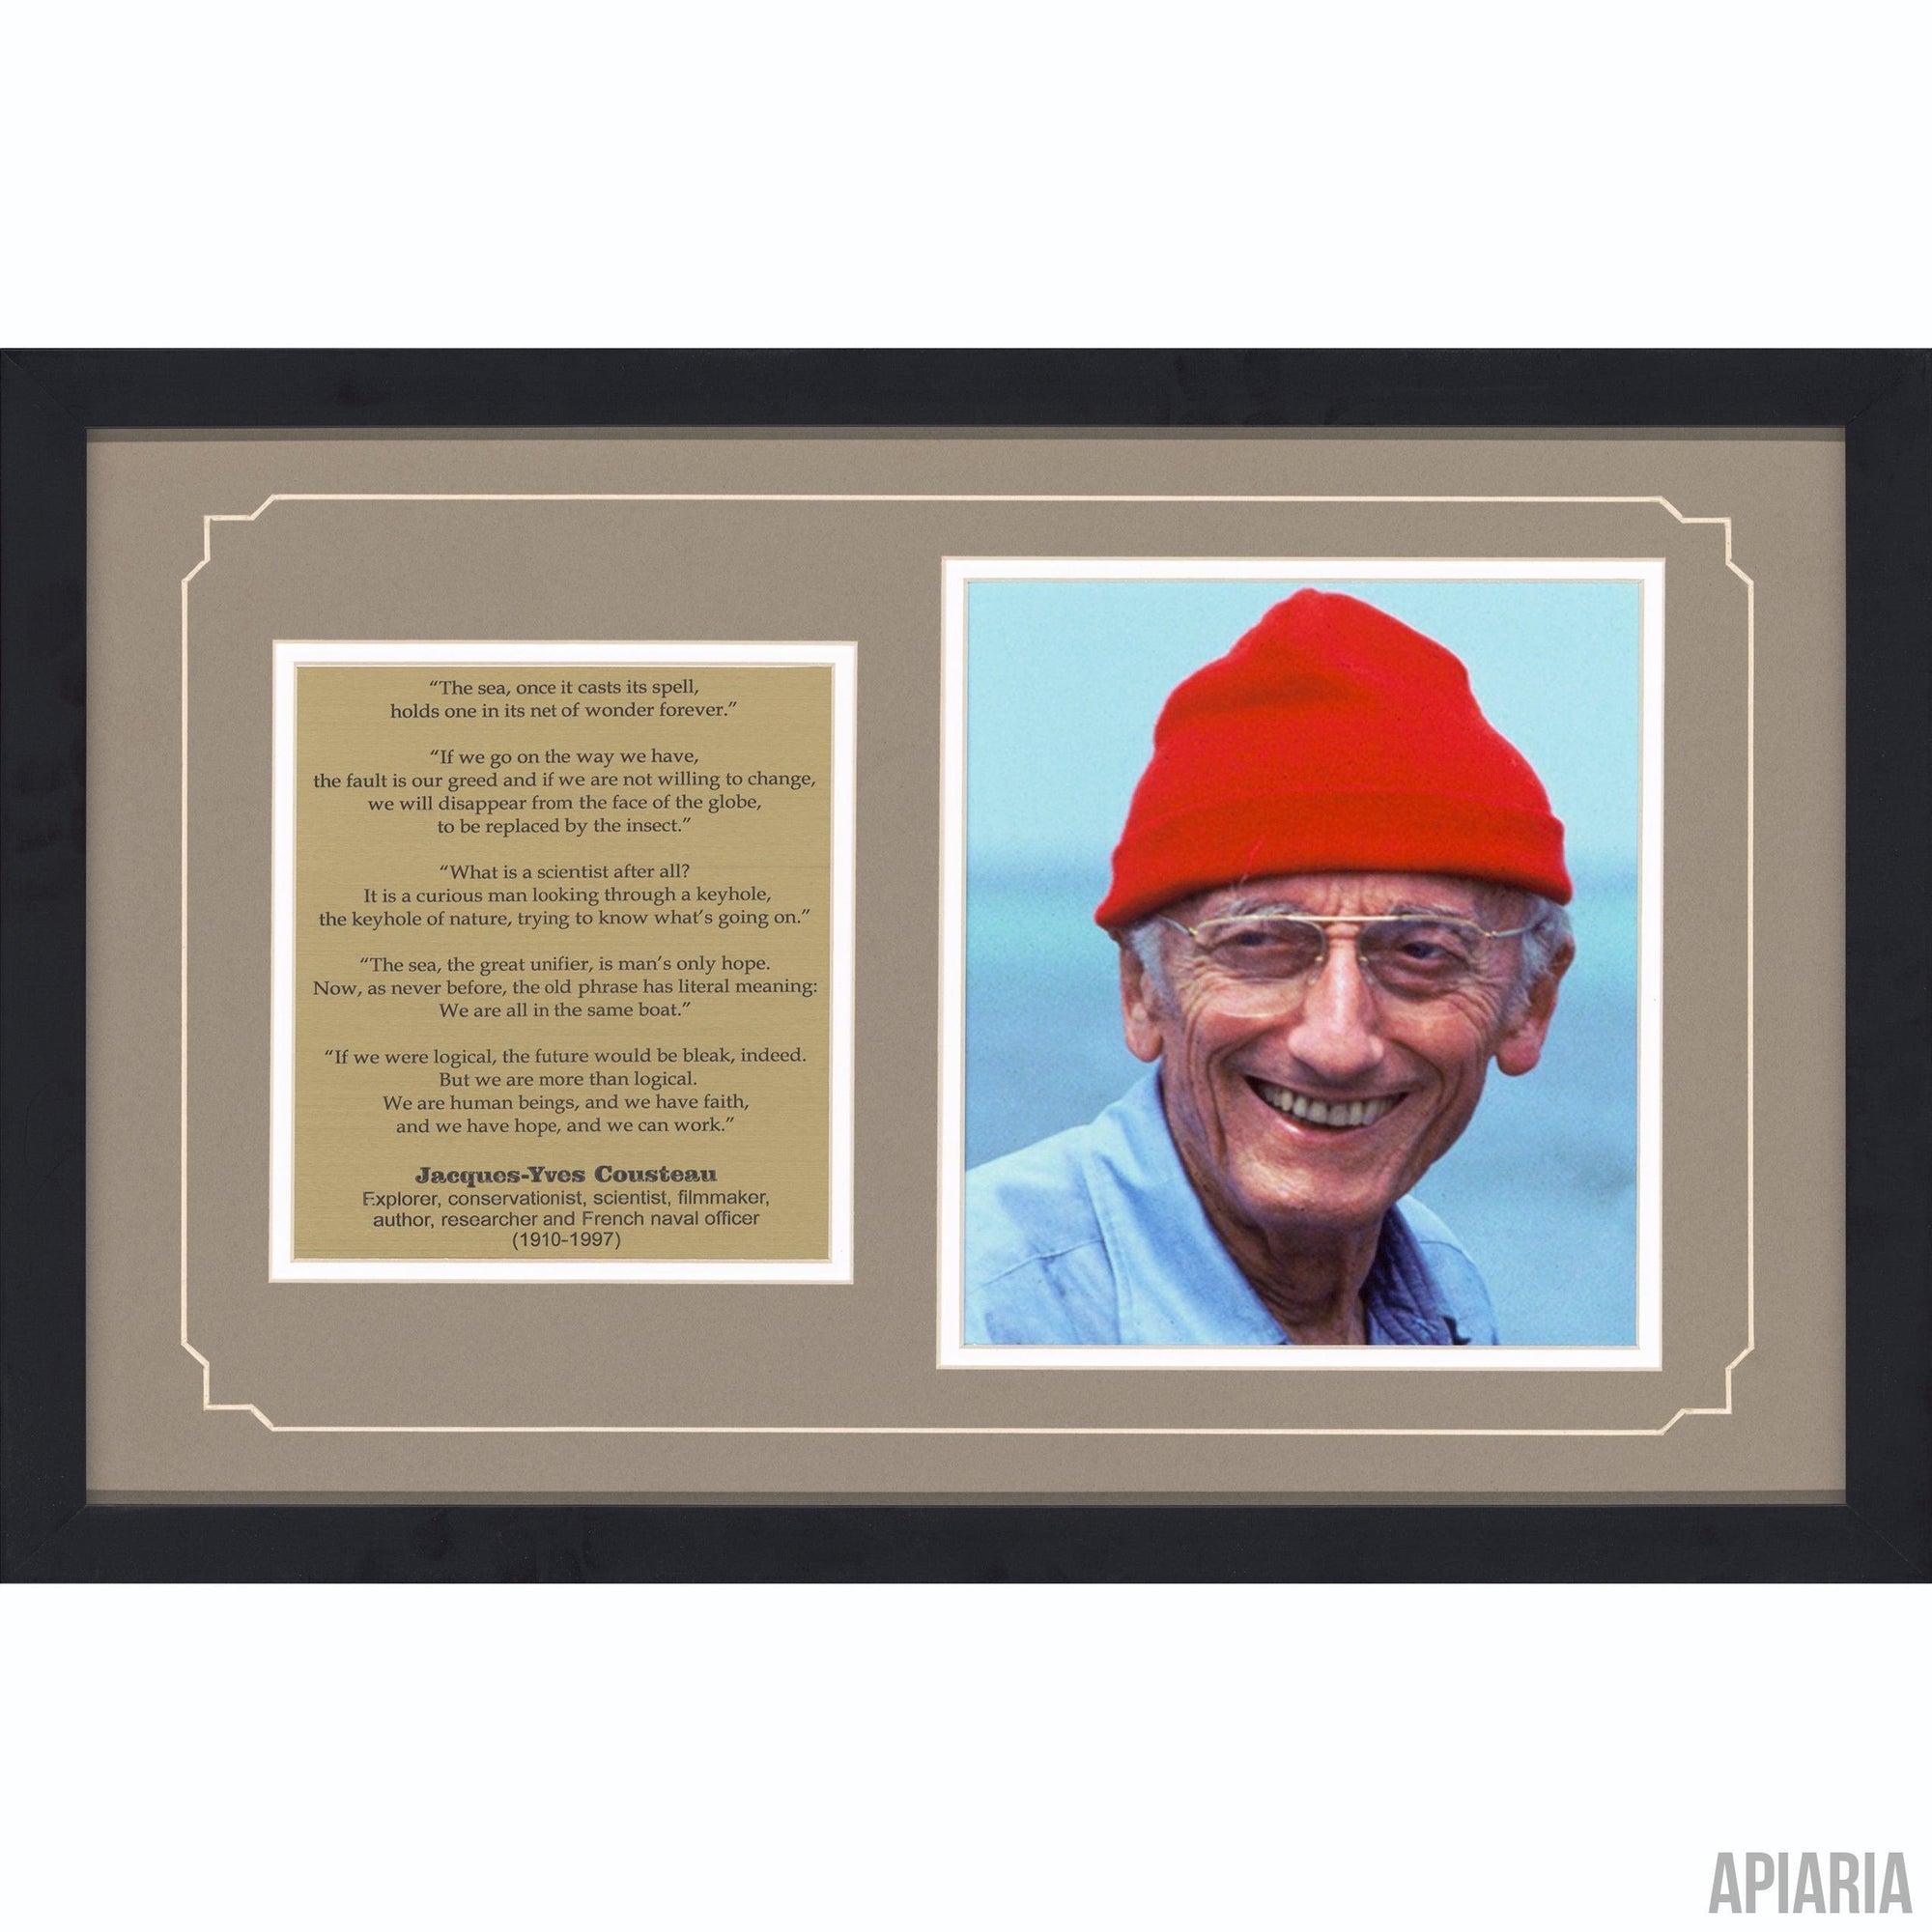 Jacques-Yves Cousteau Commemorative-Framed Item-Apiaria